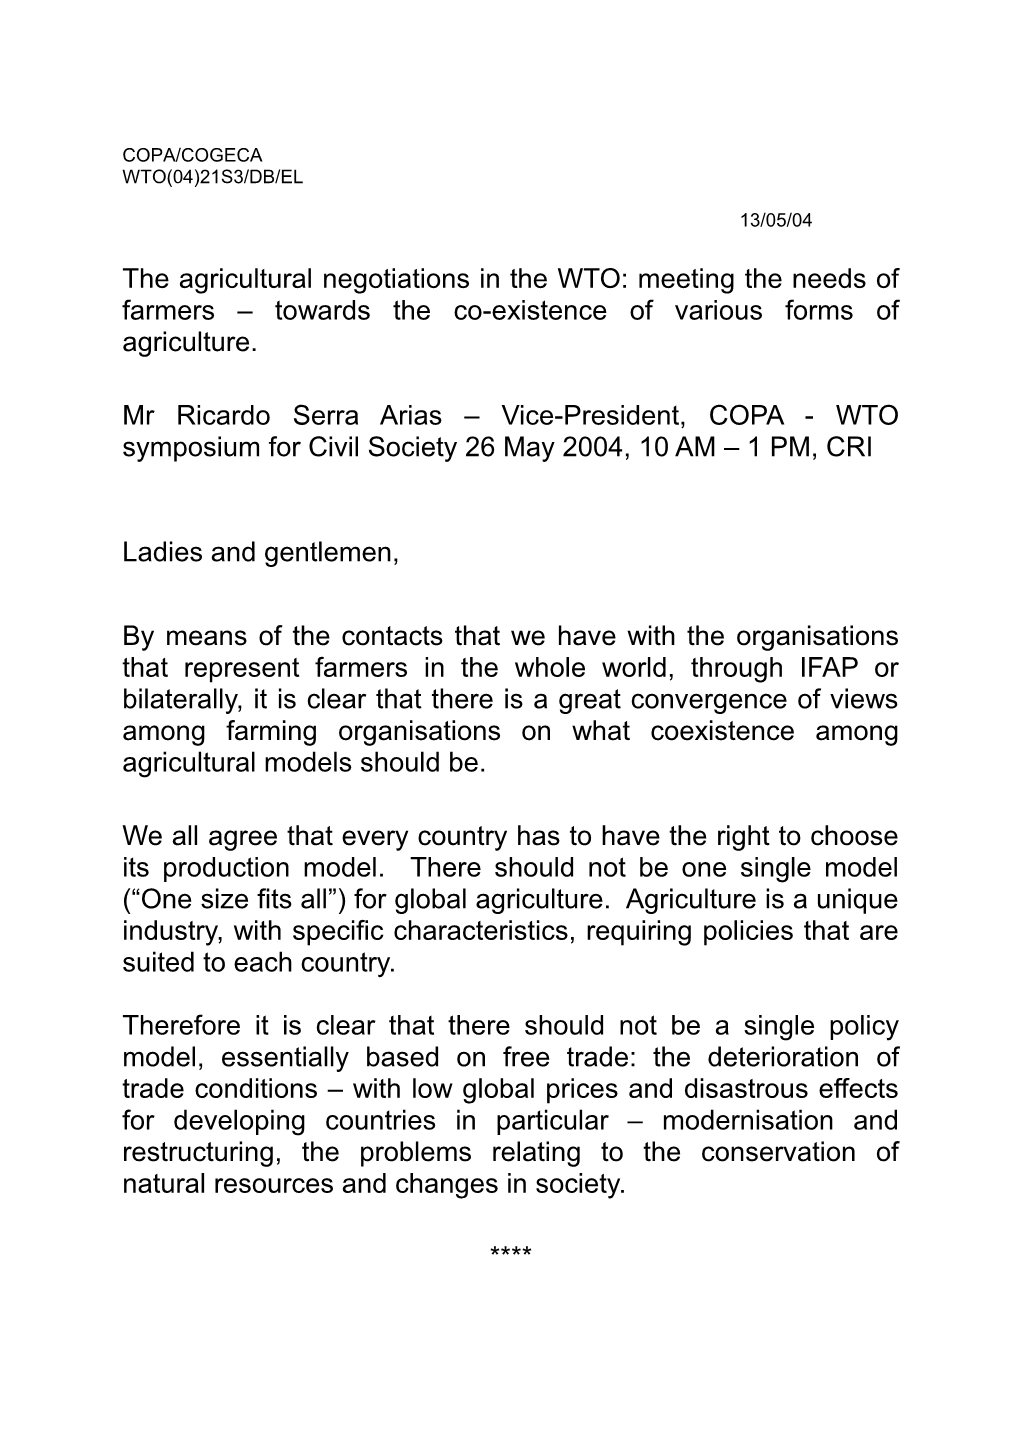 The Agricultural Negotiations in the WTO: Meeting the Needs of Farmers Towards the Co-Existence